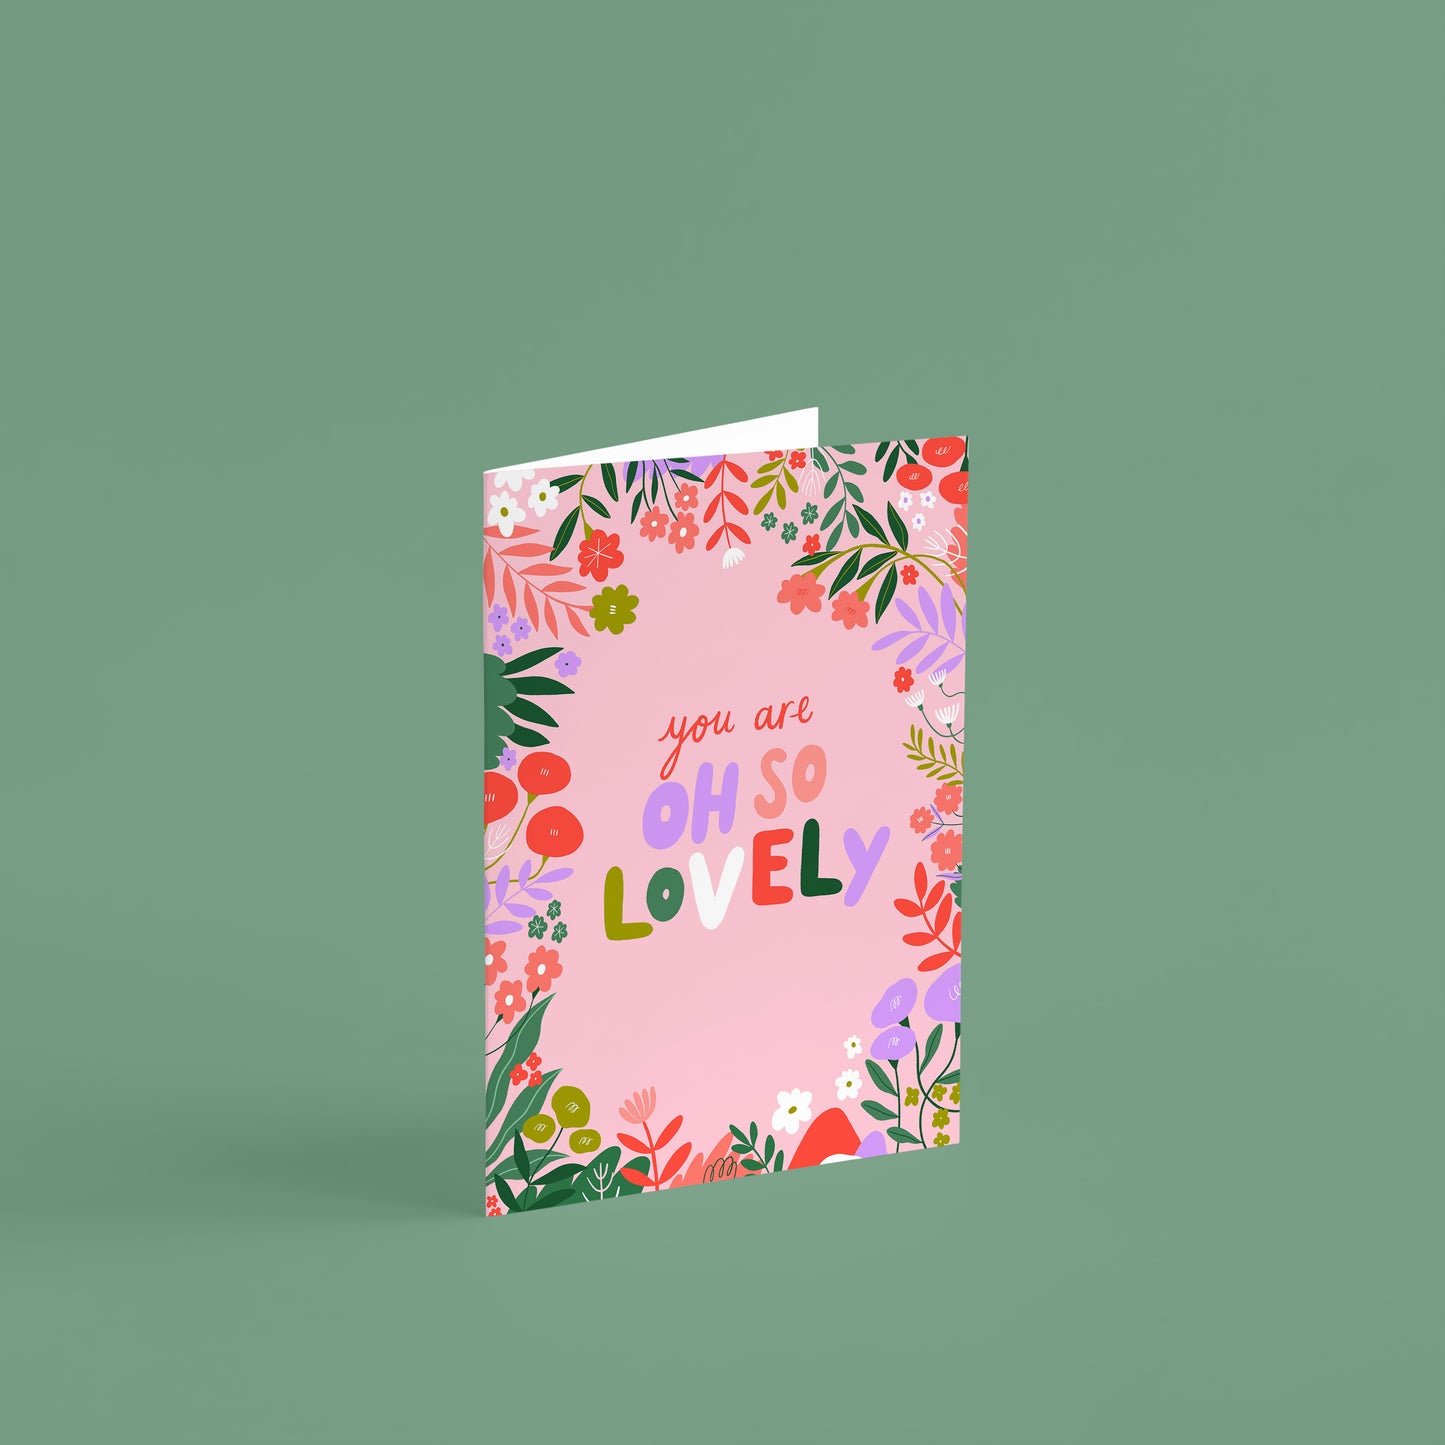 You are 'Oh So Lovely', Greetings Card